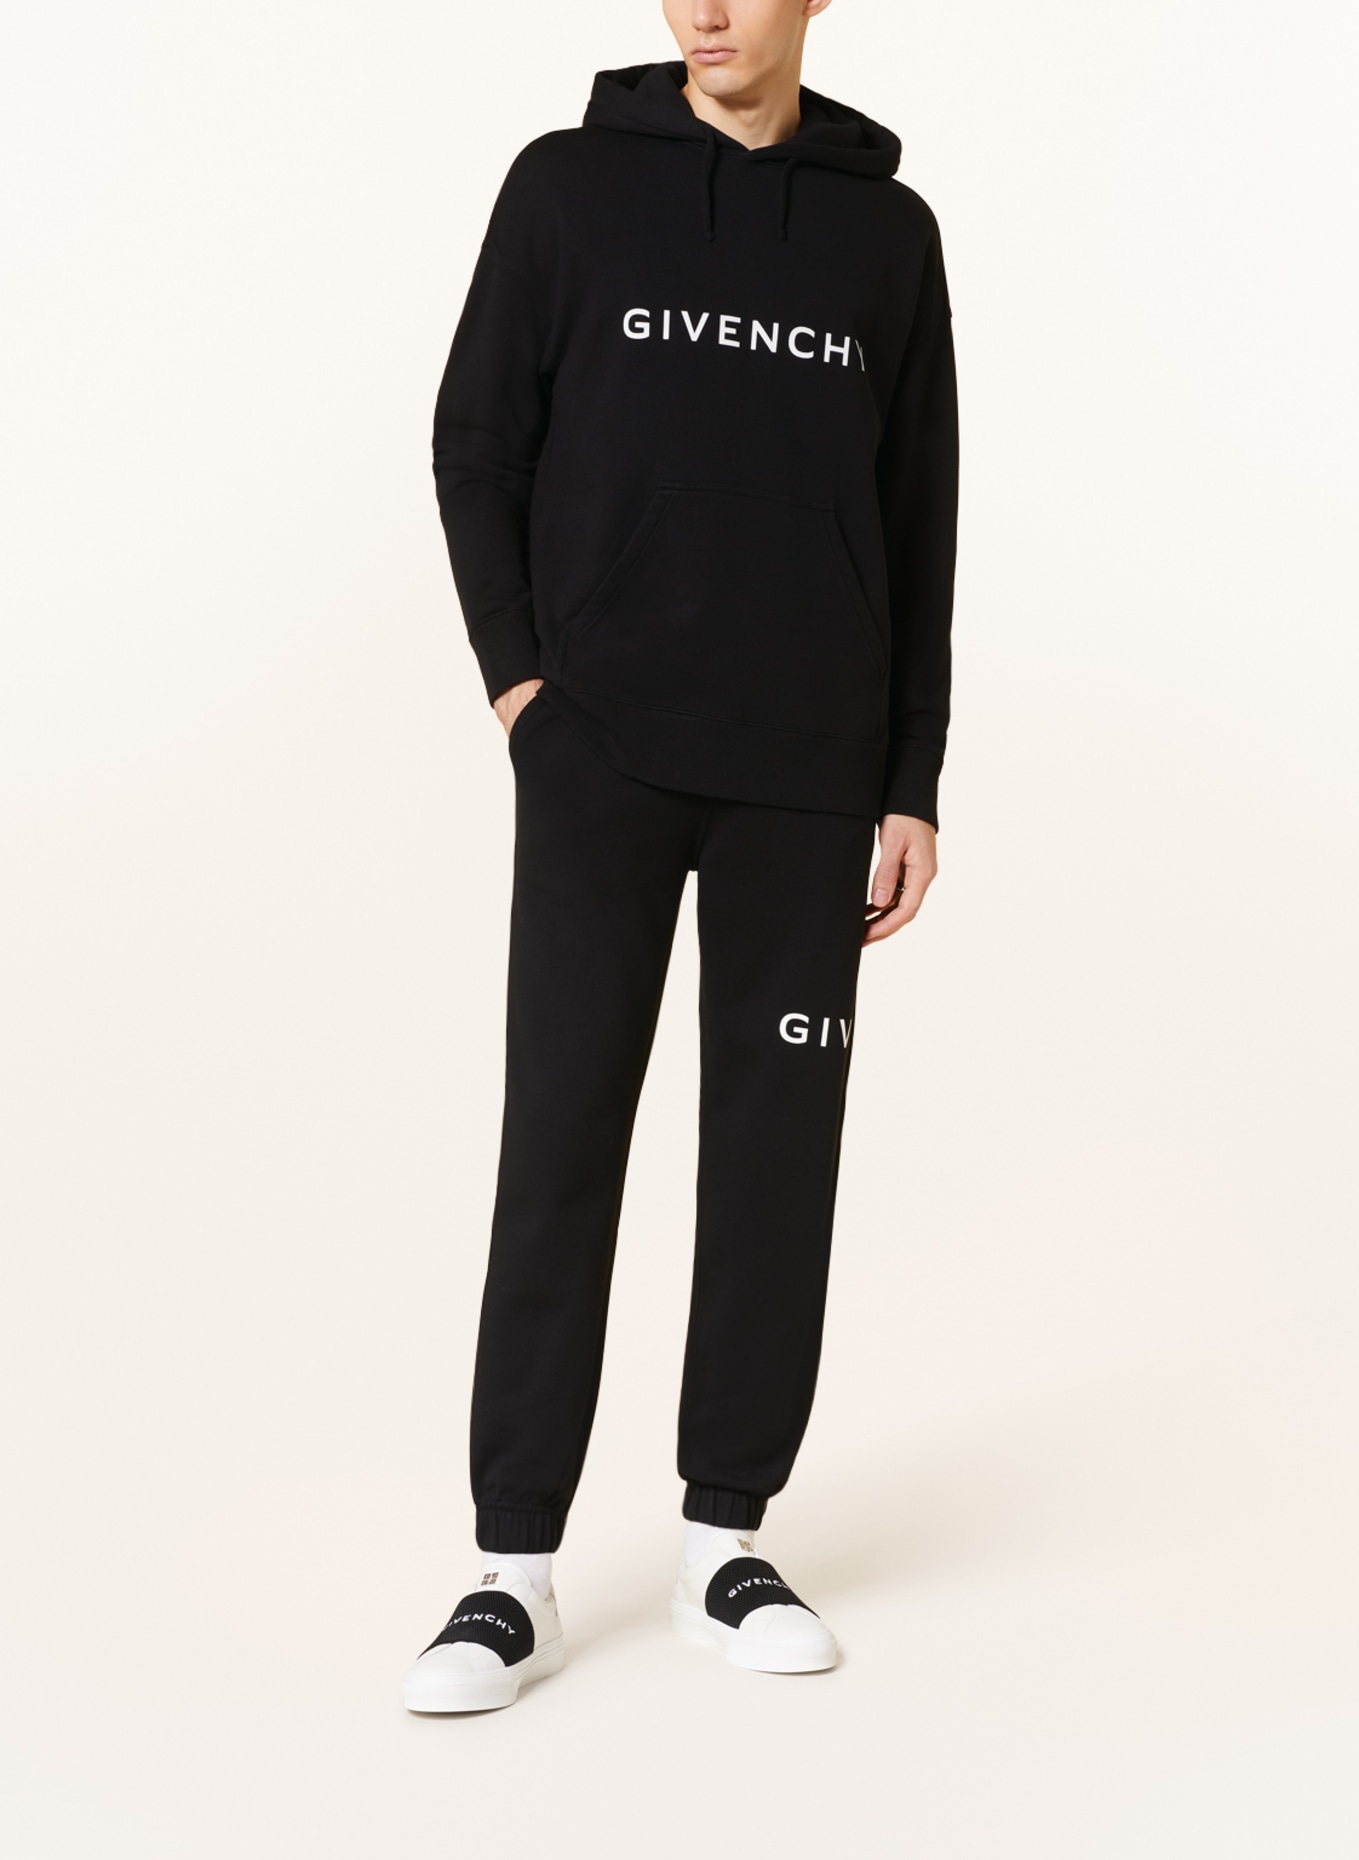 GIVENCHY Pants in jogger style in black